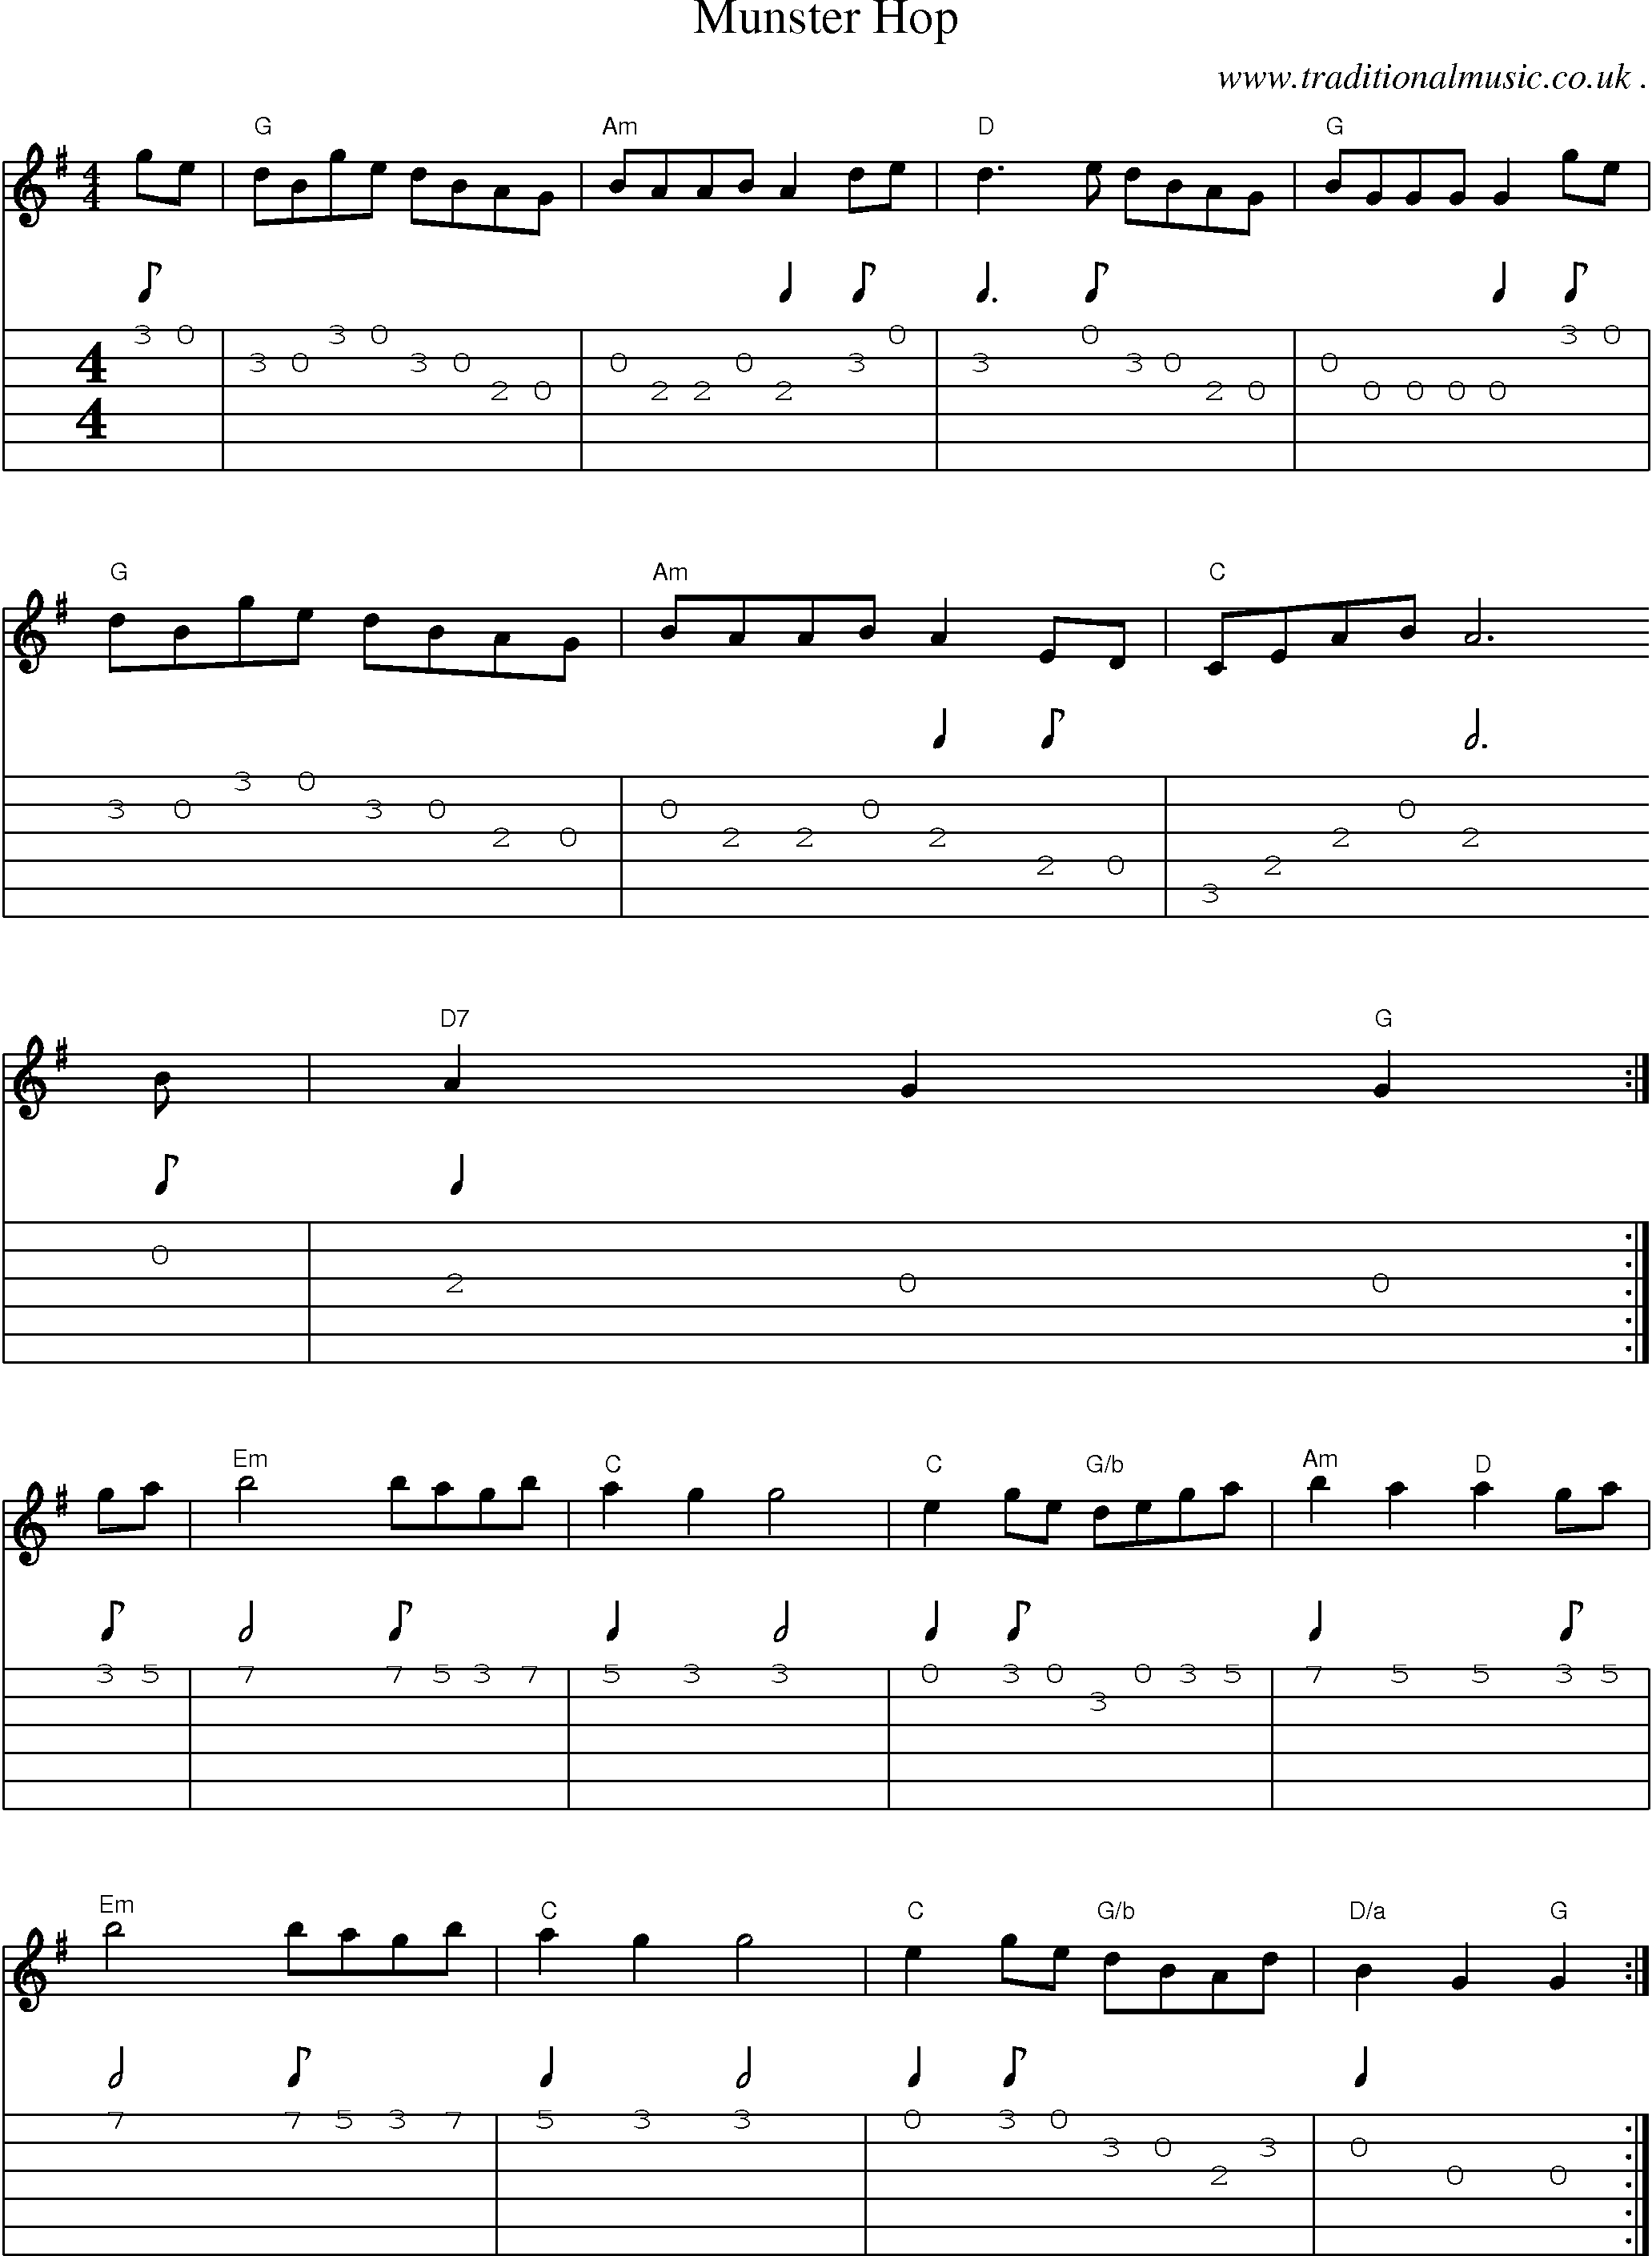 Music Score and Guitar Tabs for Munster Hop